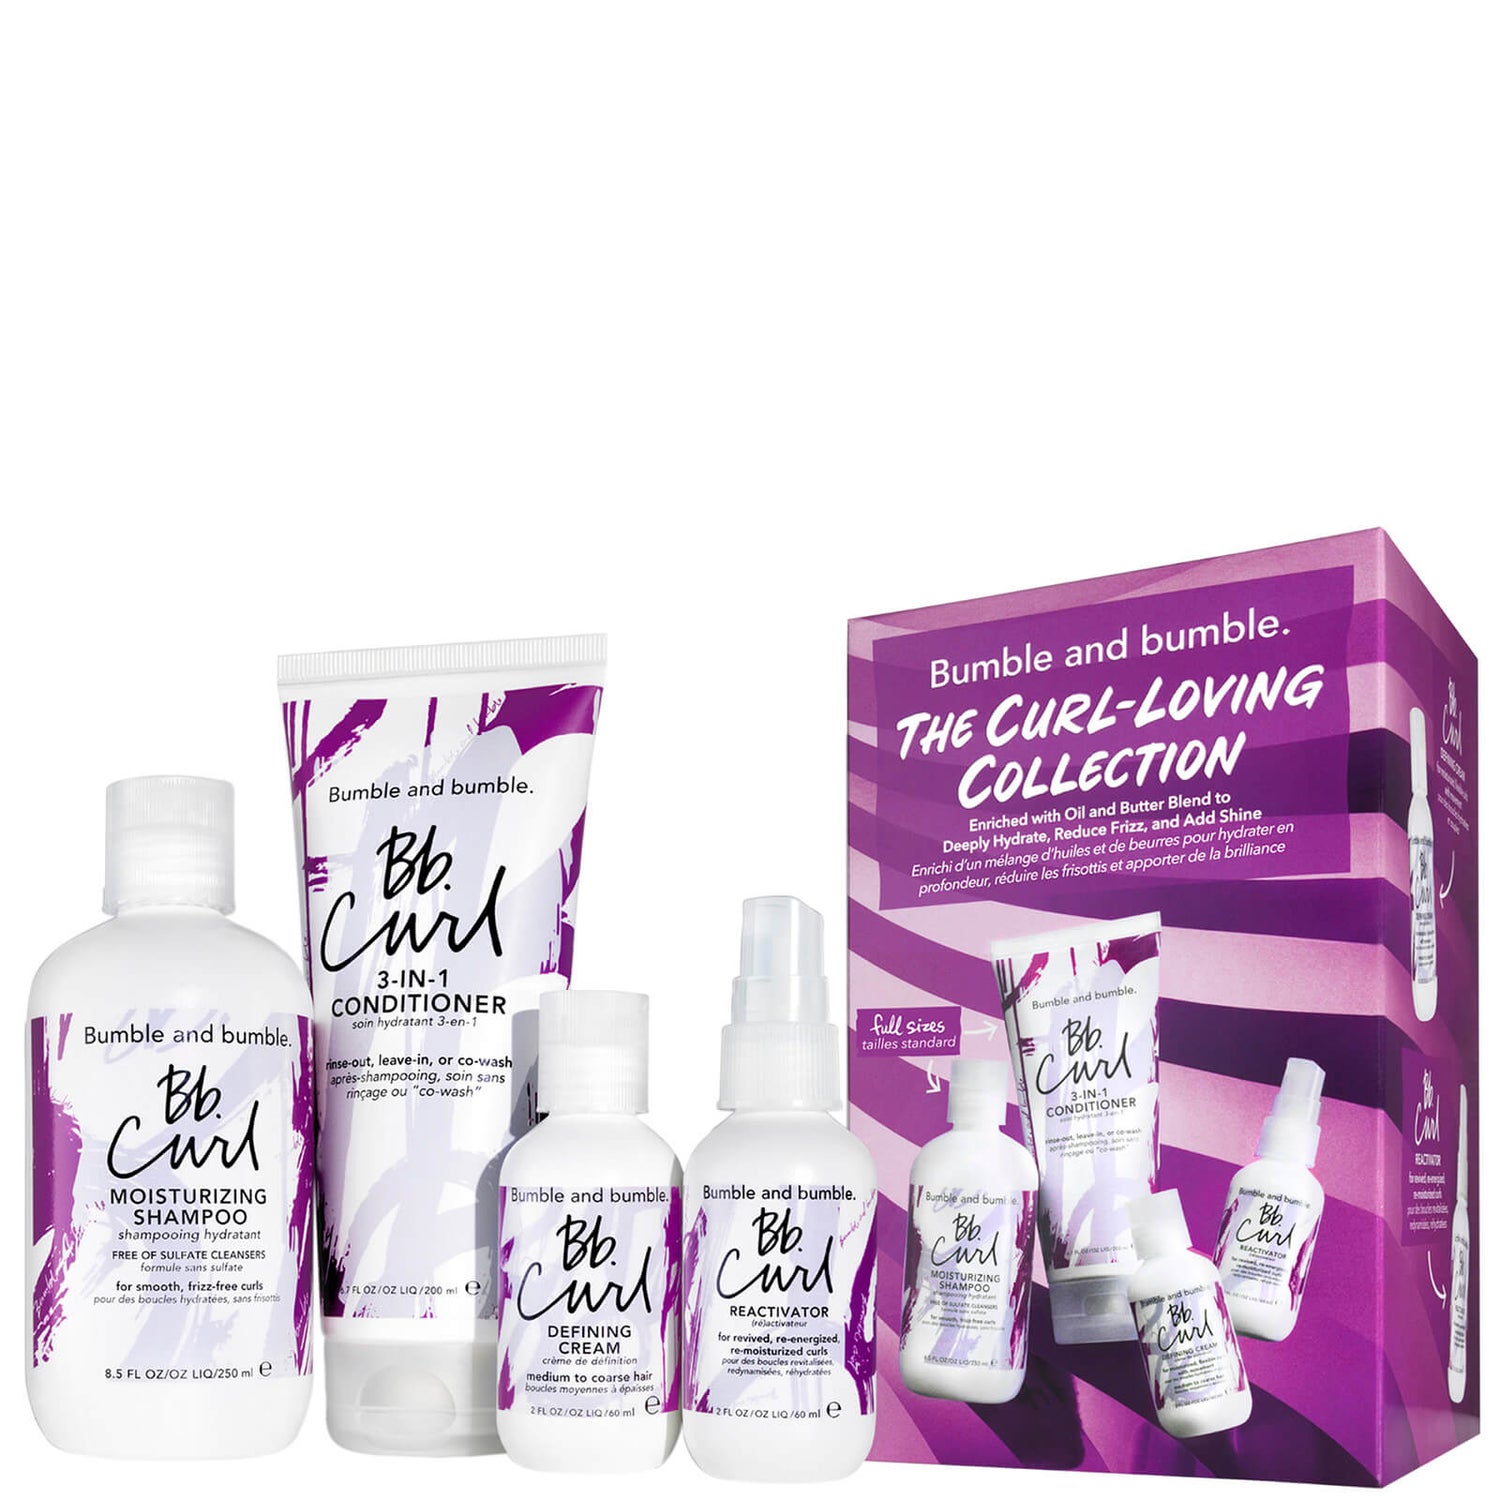 Bumble and bumble The Curl-Loving Set (Worth £79.00)